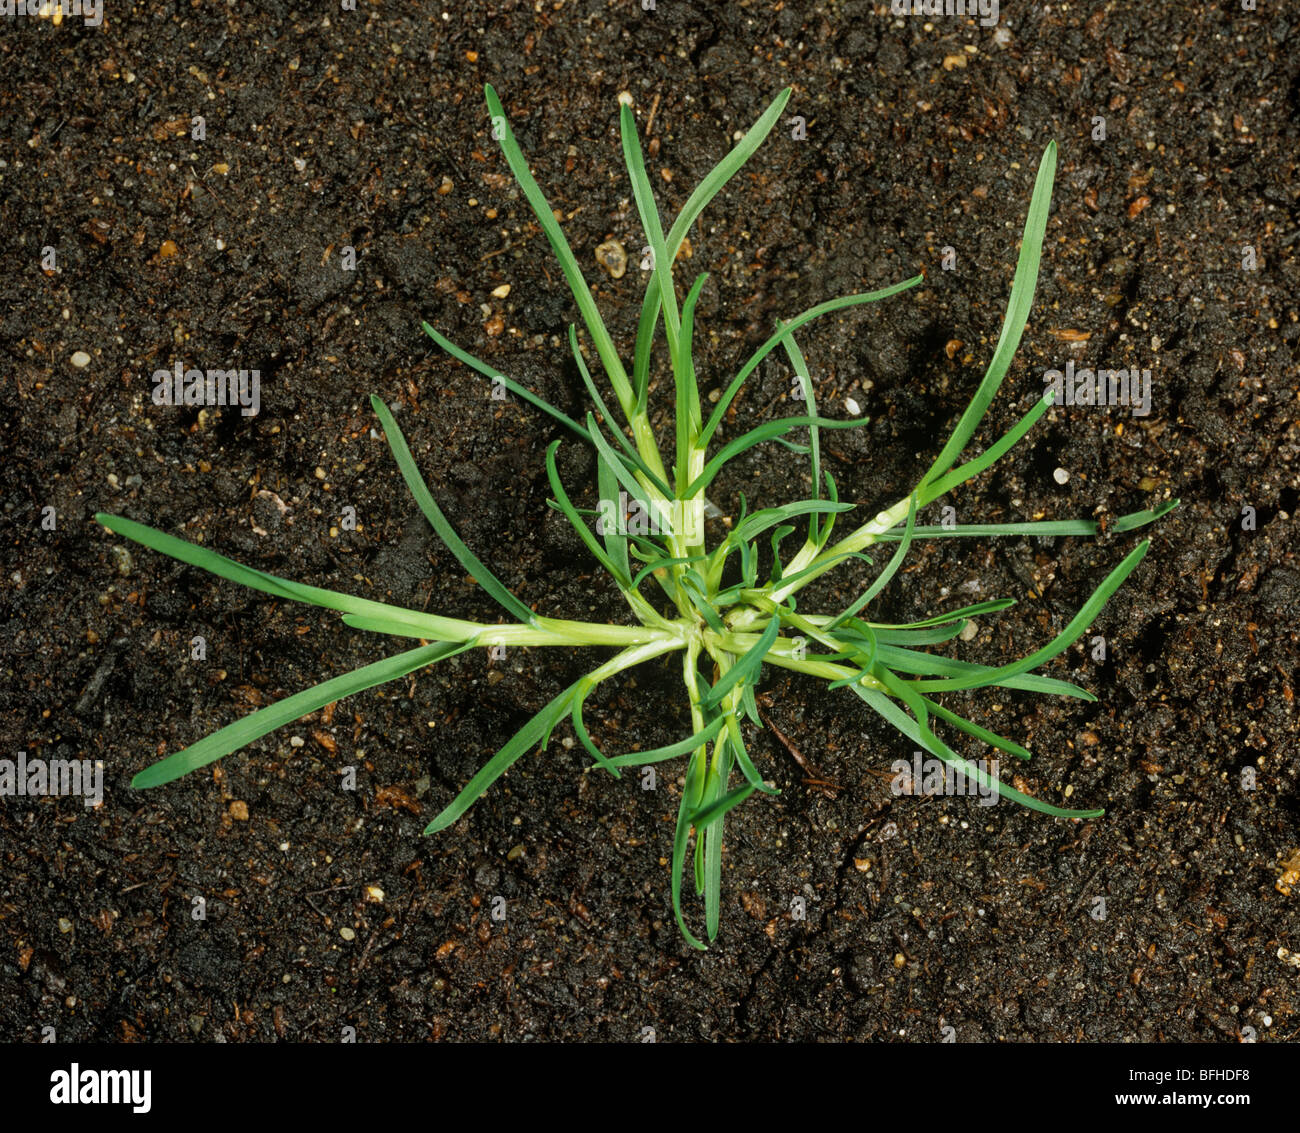 Rough-stalked meadow grass (Poa trivialis) young tillering prostrate plant Stock Photo